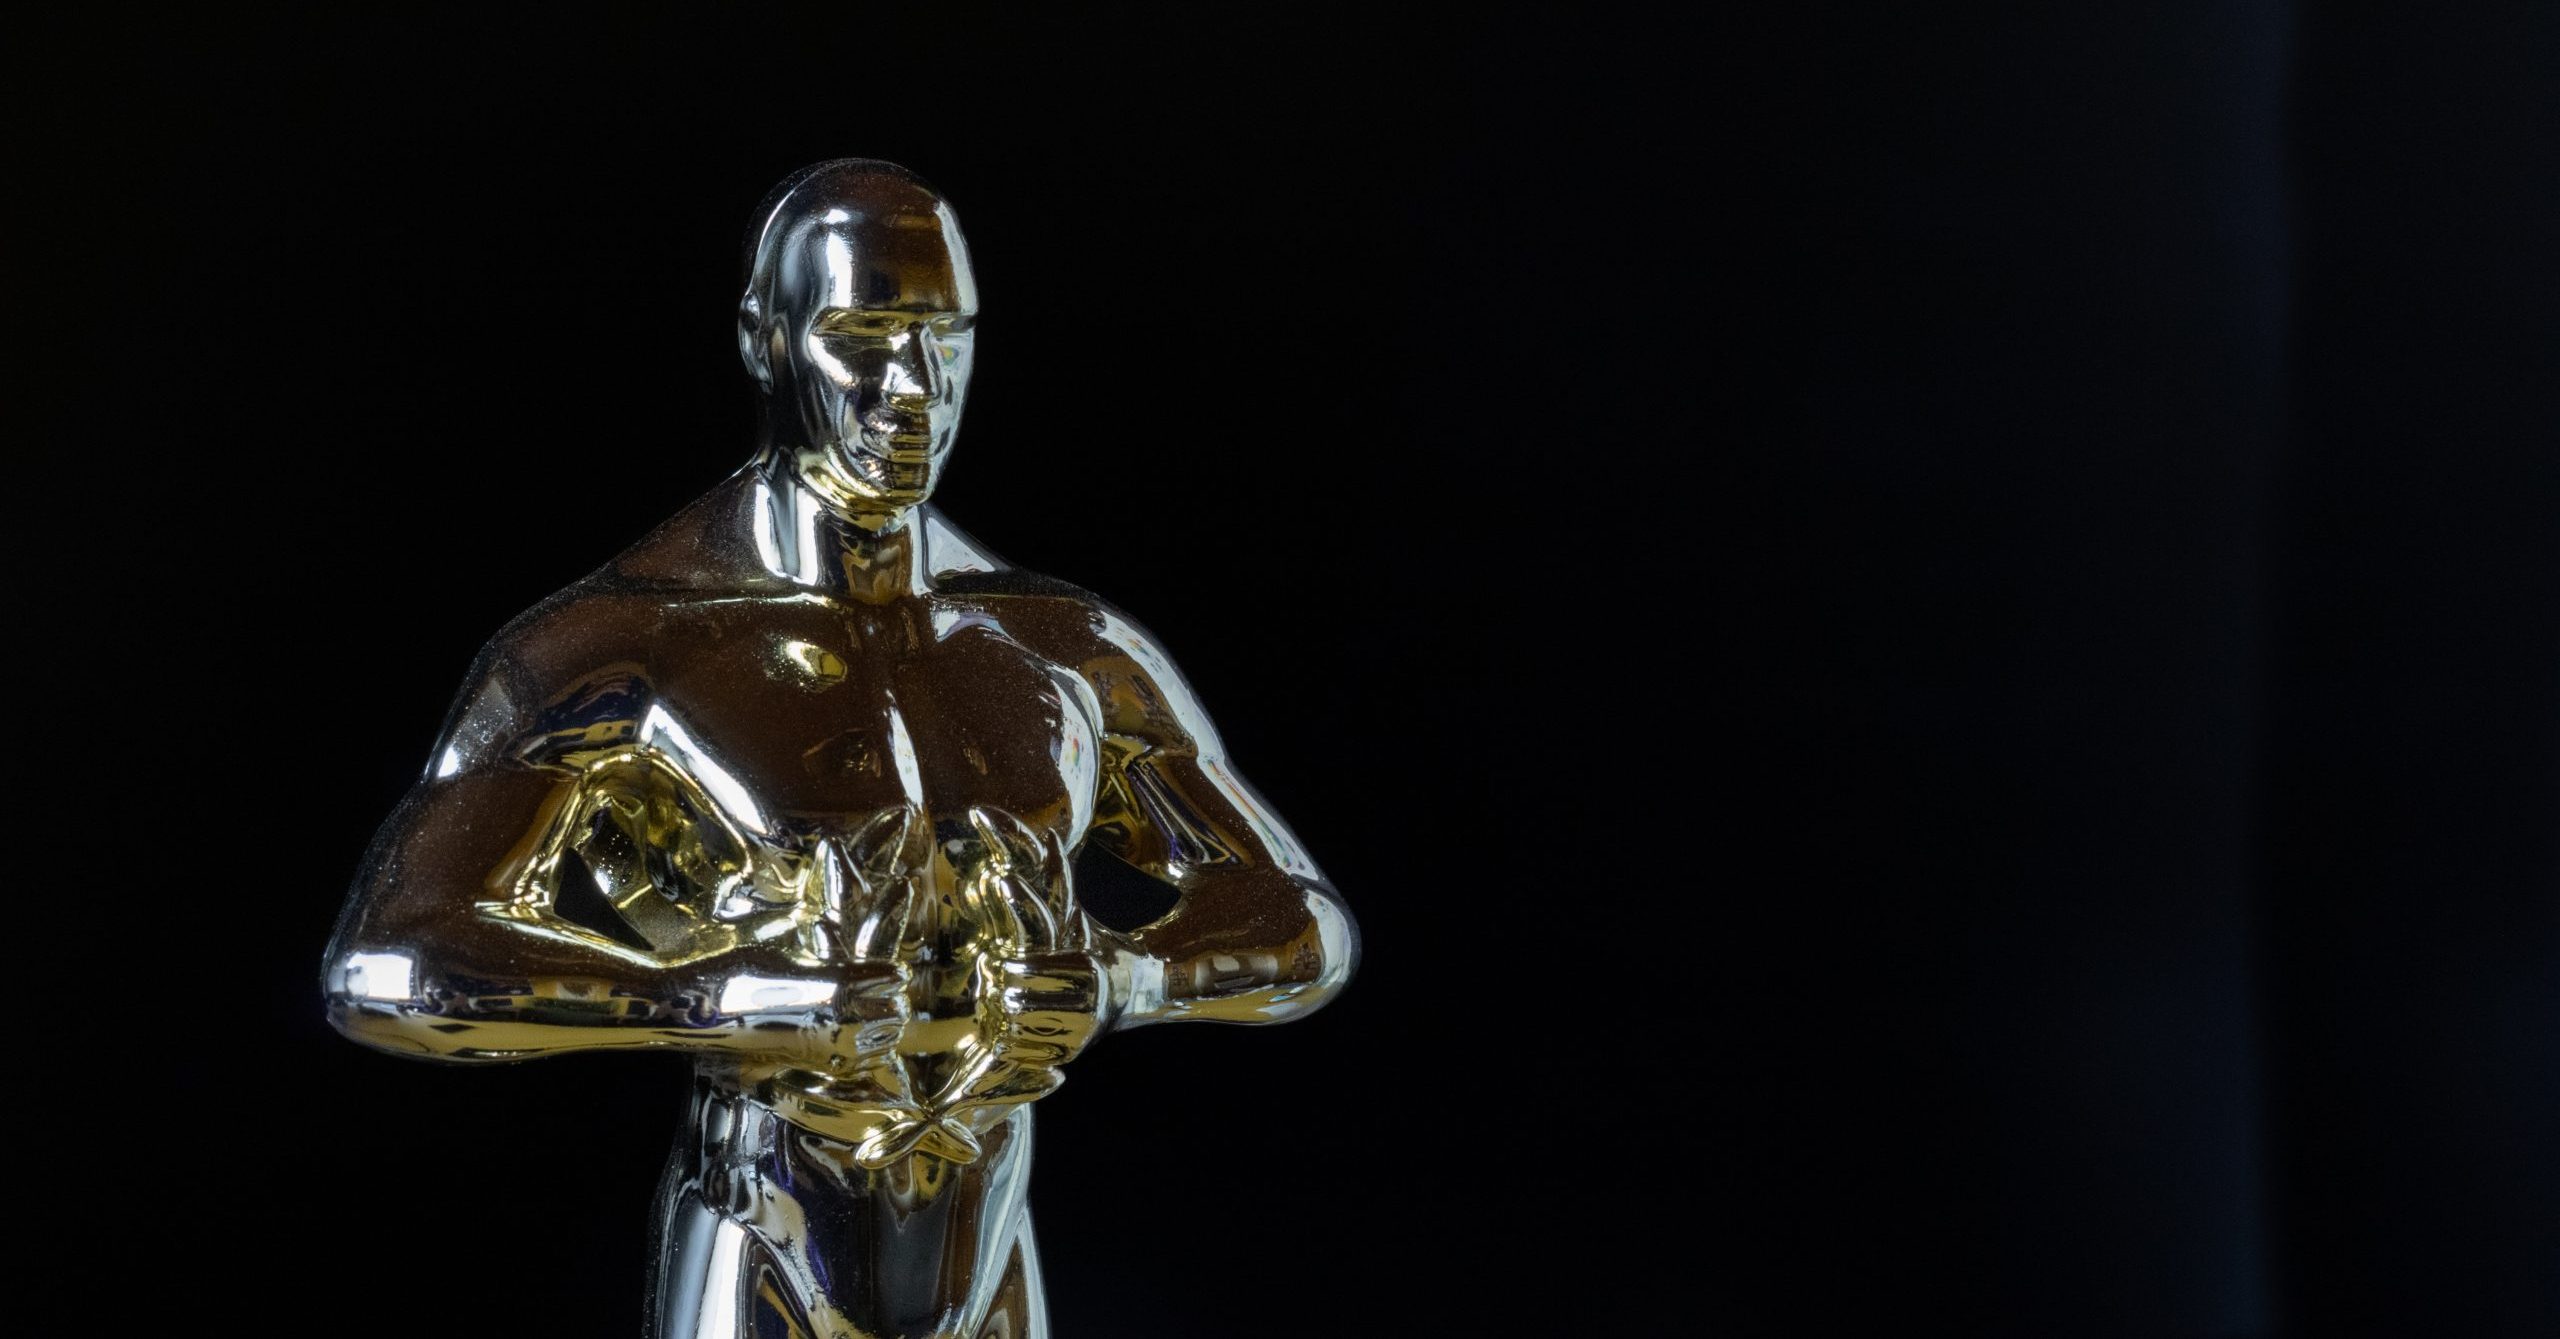 Oscar Winners Turn to DriveSavers for Film’s Data Recovery